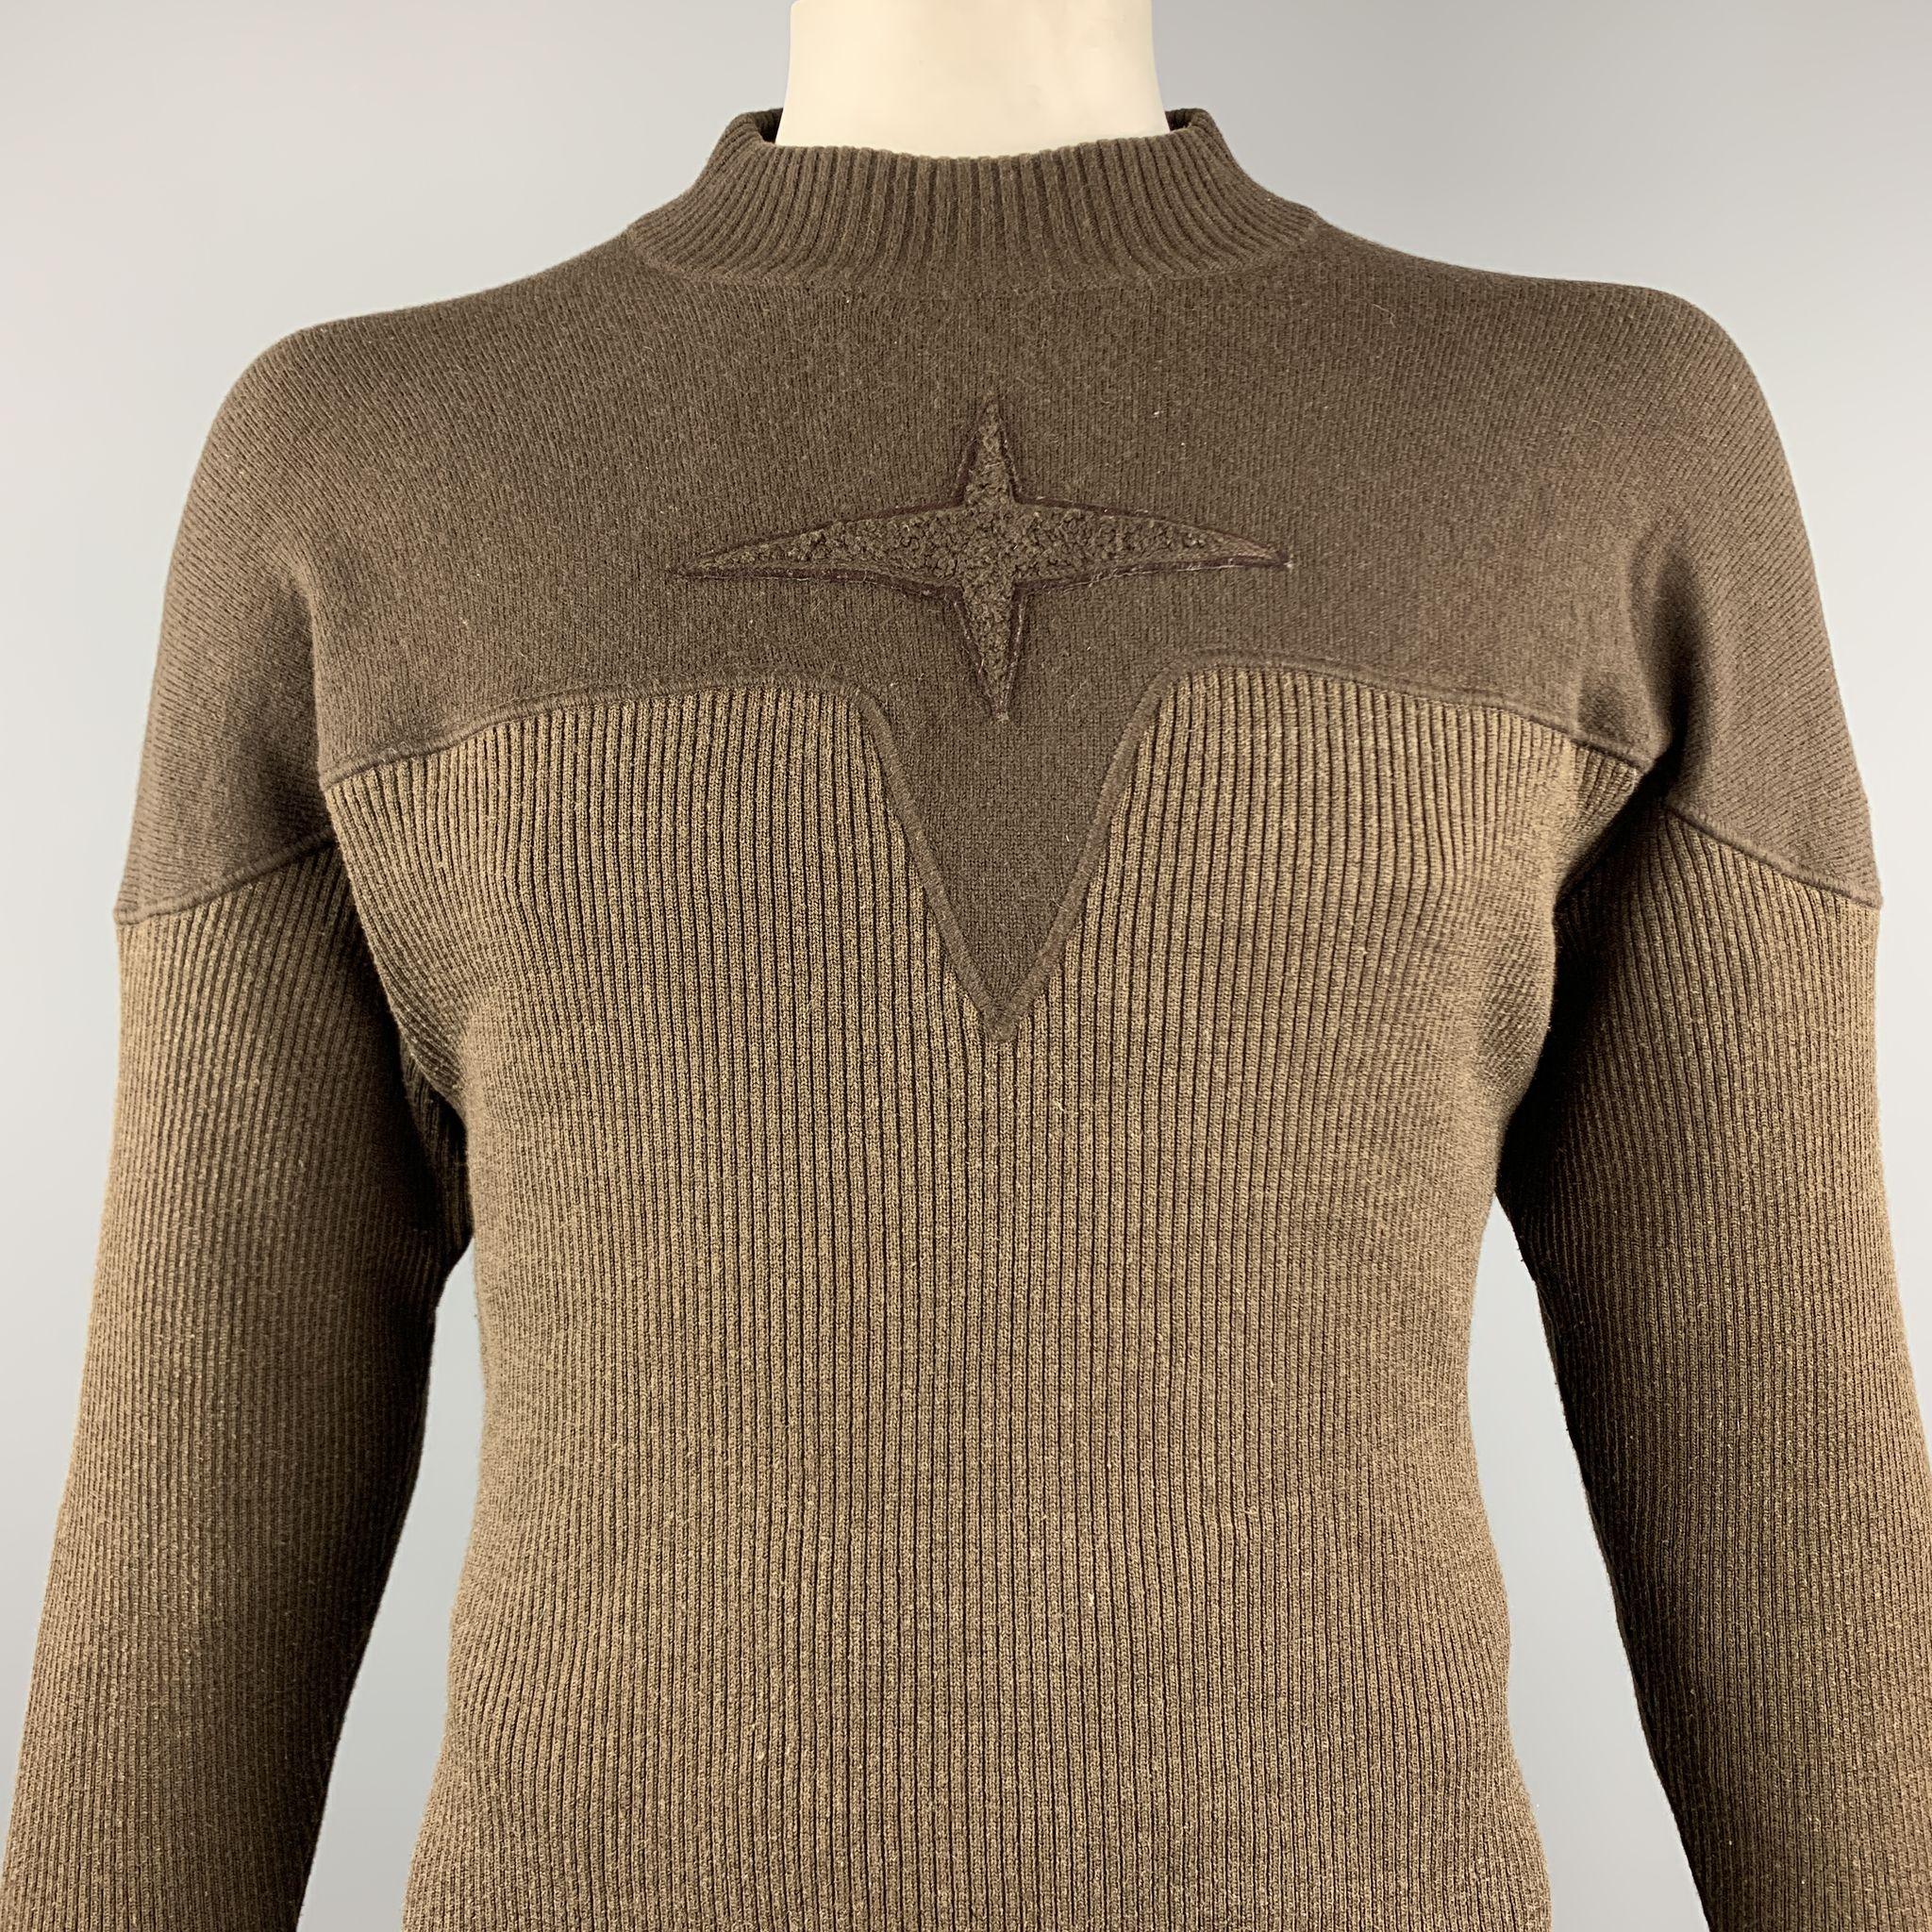 ARMAND BASI pullover comes in a brown ribbed knit wool blend featuring a front star detail and a thick ribbed crew-neck. Made in Spain. 

Very Good Pre-Owned Condition.
Marked: XL

Measurements:

Shoulder: 19 in. 
Chest: 42 in. 
Sleeve: 26.5 in.